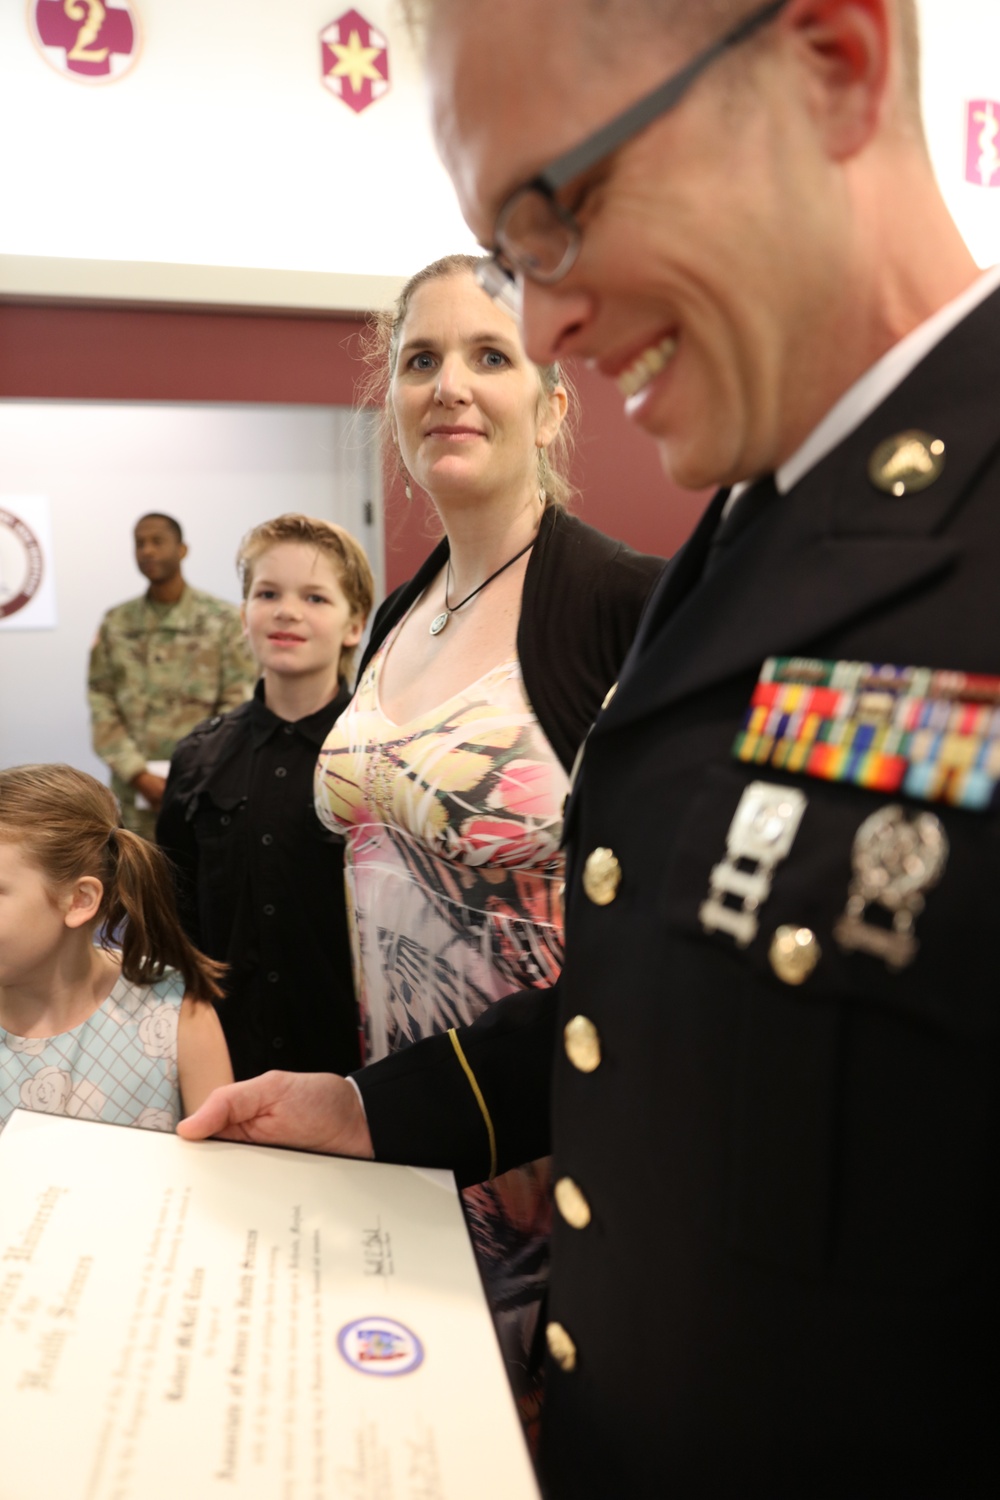 DoD College of Allied Health Sciences Awards First Undergraduate Degree